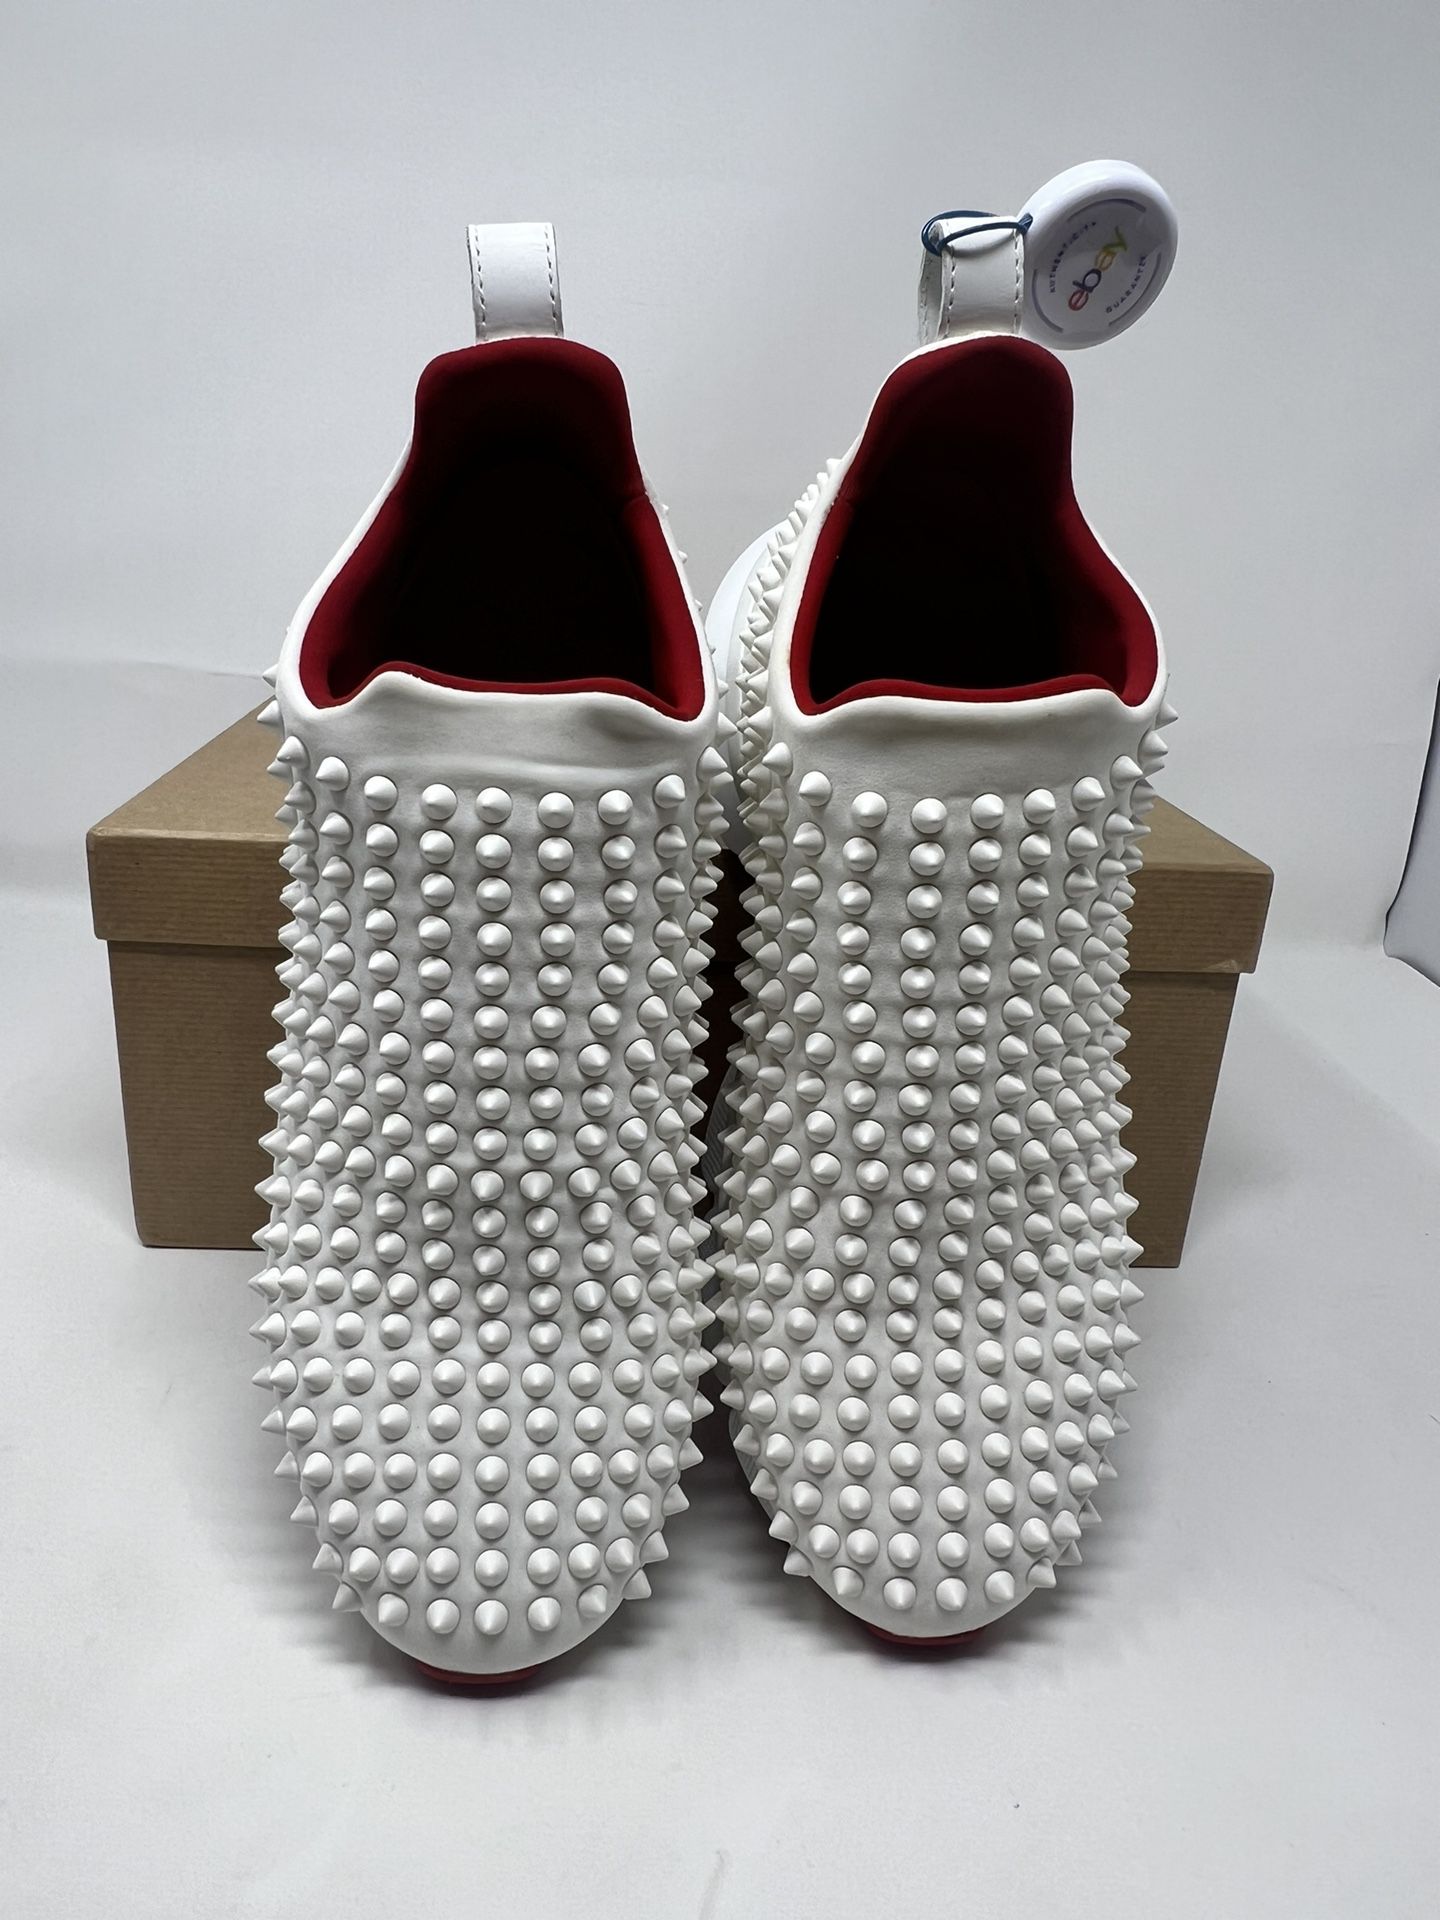 Christian Louis Vuitton spiked socks Donna red soles sizes 7-11 for Sale in  Johnson City, TN - OfferUp